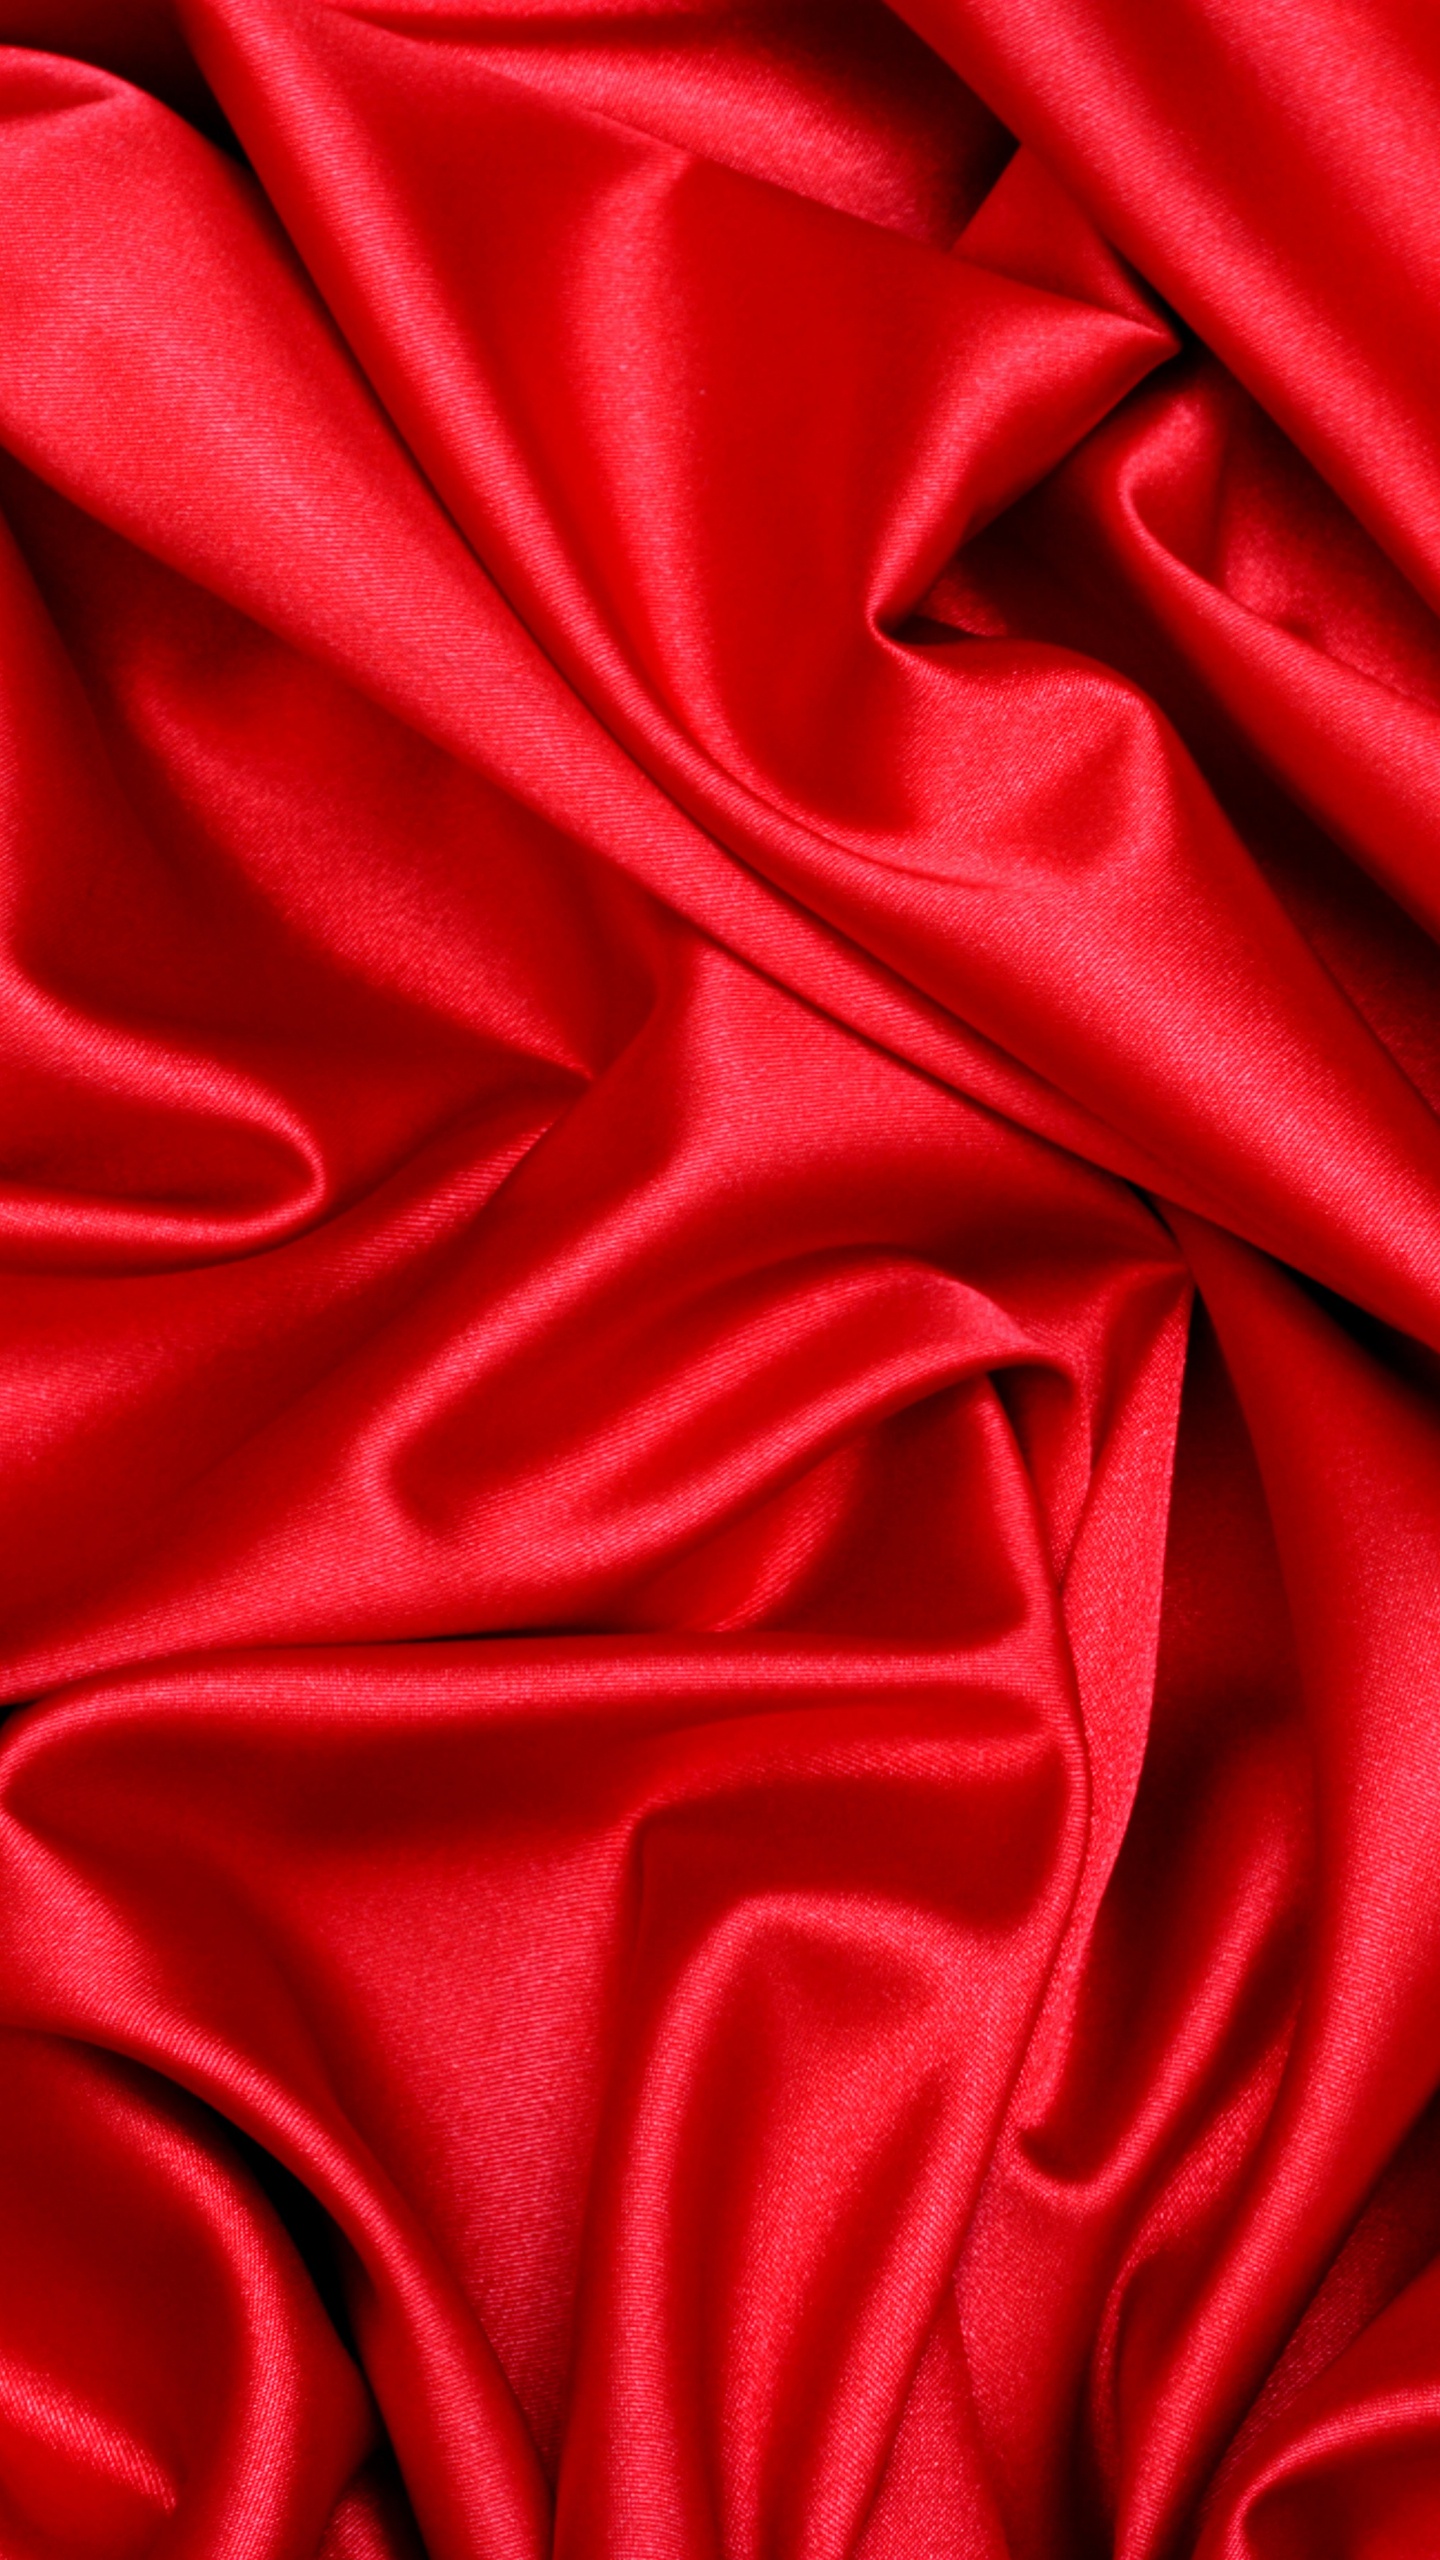 Red Textile in Close up Photography. Wallpaper in 1440x2560 Resolution